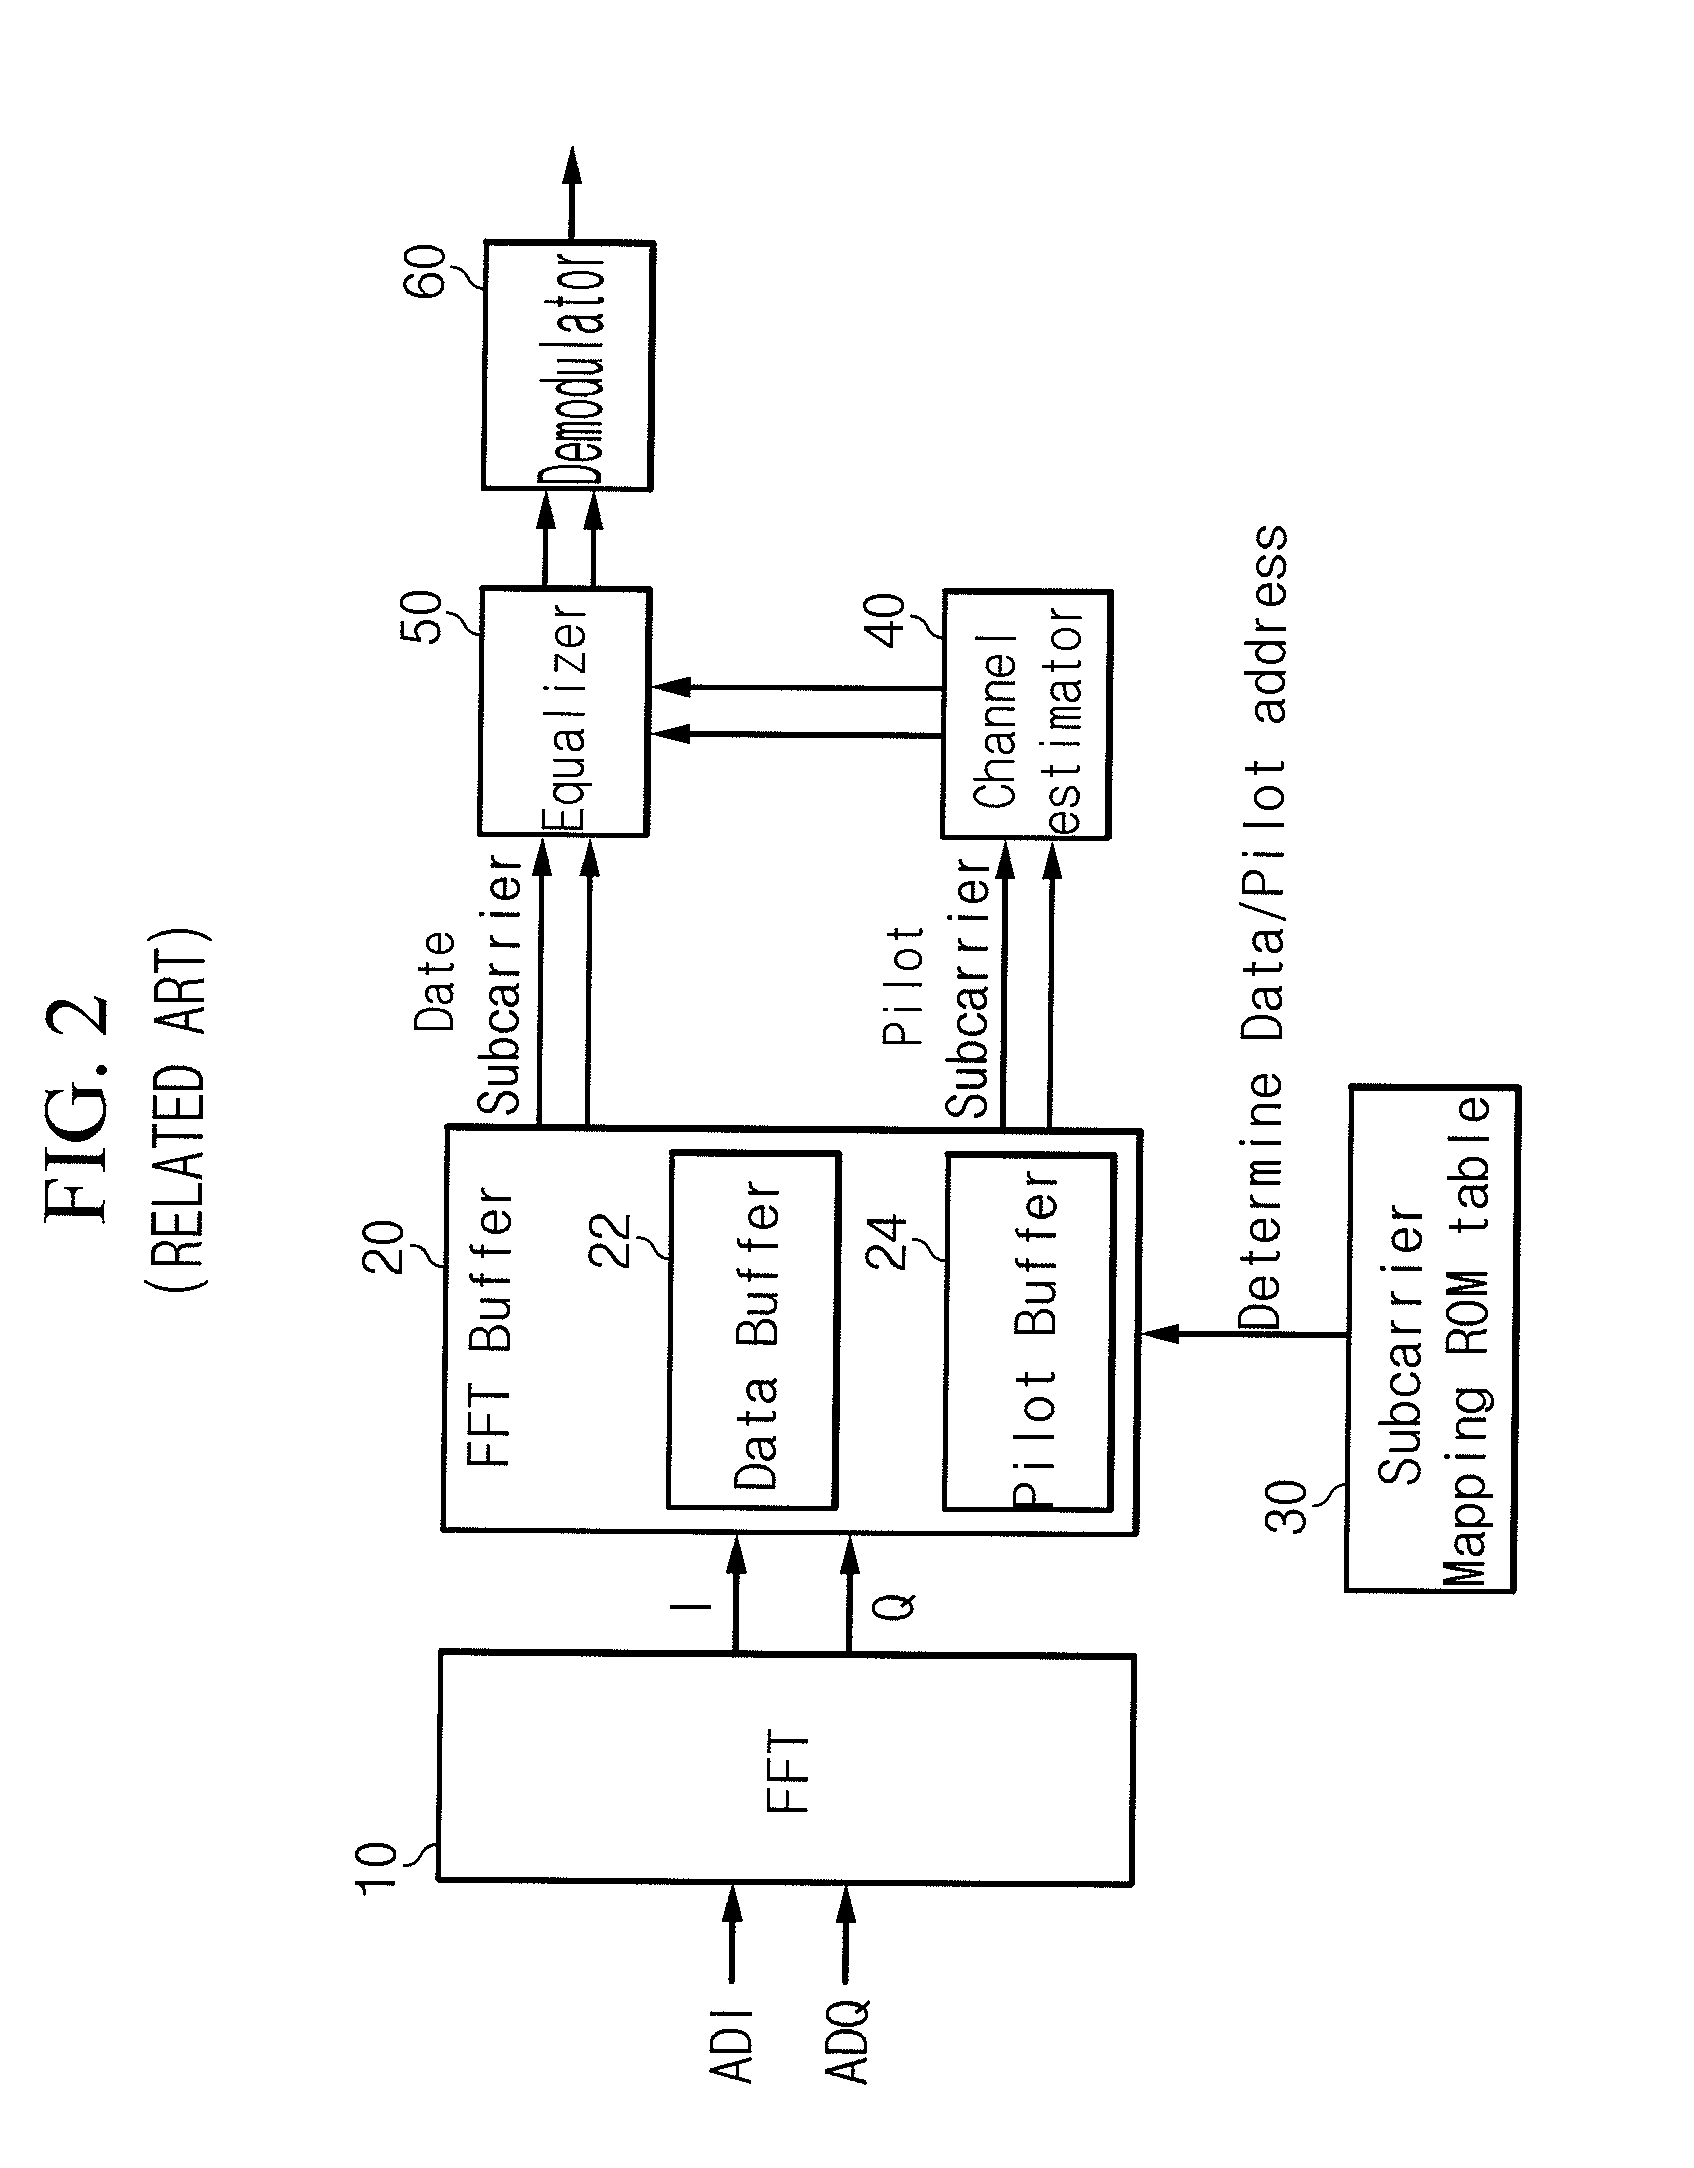 Subcarrier allocation apparatus and method, subcarrier de-allocation apparatus and method in OFDM system